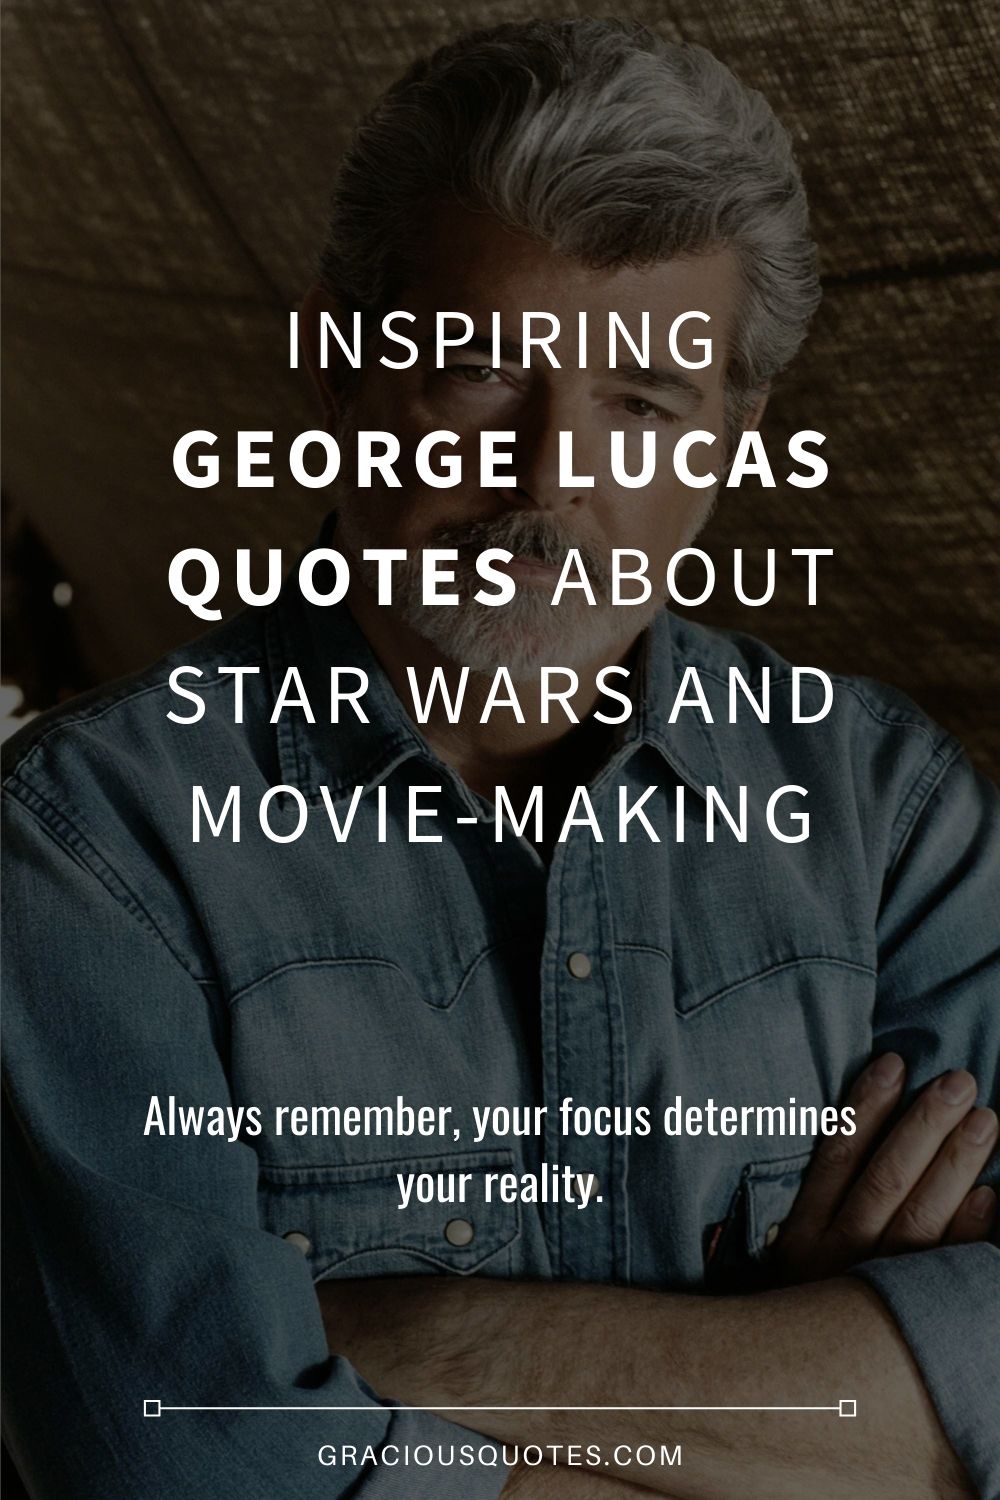 Inspiring-George-Lucas-Quotes-About-Star-Wars-And-Movie-making-Gracious-Quotes